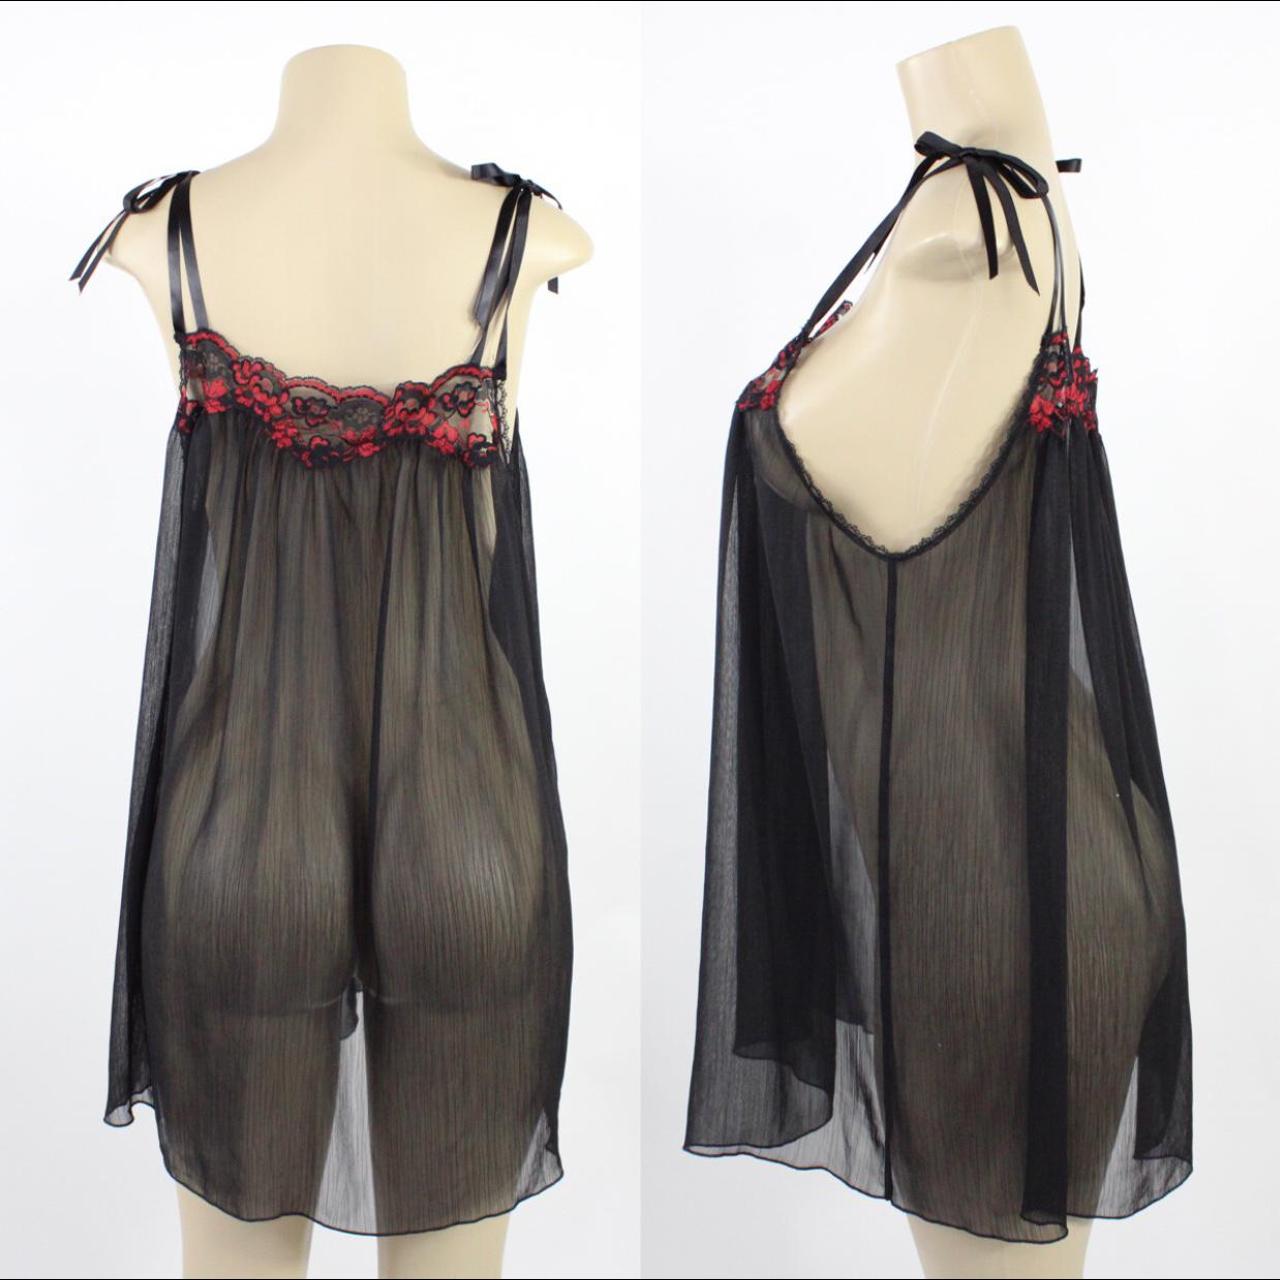 Product Image 2 - Vintage red and black sheer